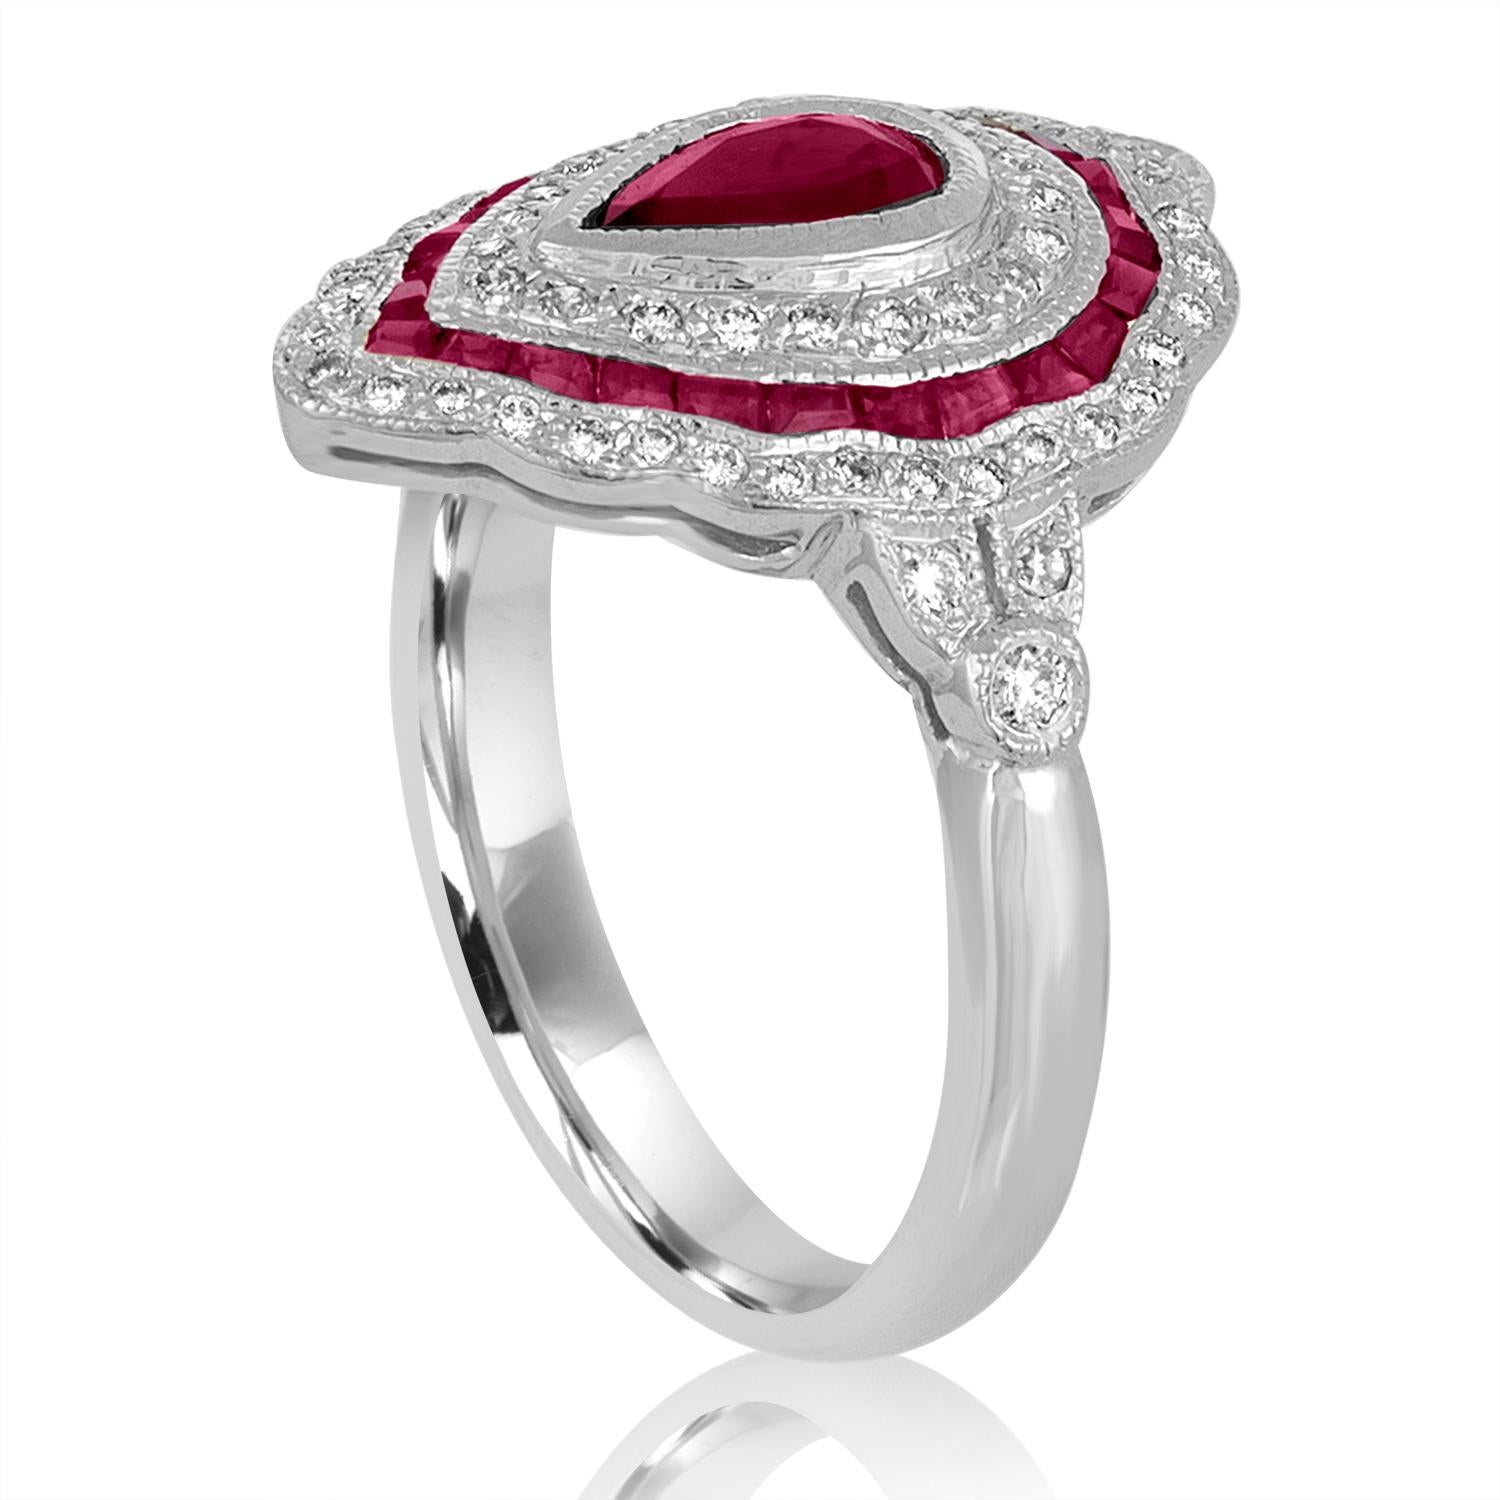 Art Deco Revival Style Ring
The ring is 18K White Gold
There are 0.40 Carats in Diamonds H SI
There are 0.80 Carats in Rubies
The ring is a size 6.50, sizable
The ring weighs 5.2 grams